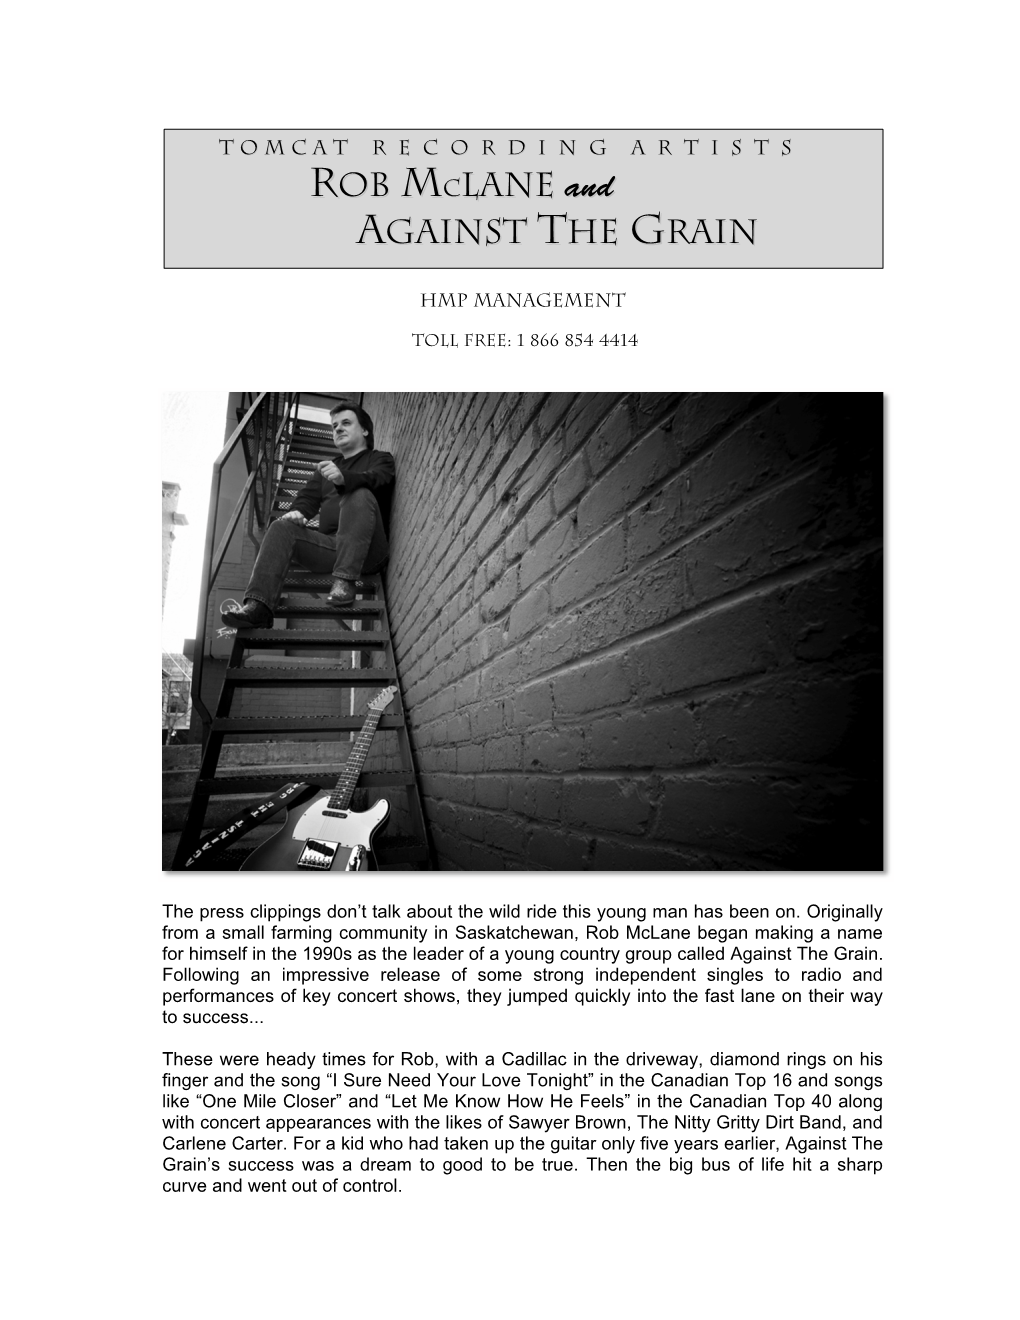 Rob Mclane and Against the Grain